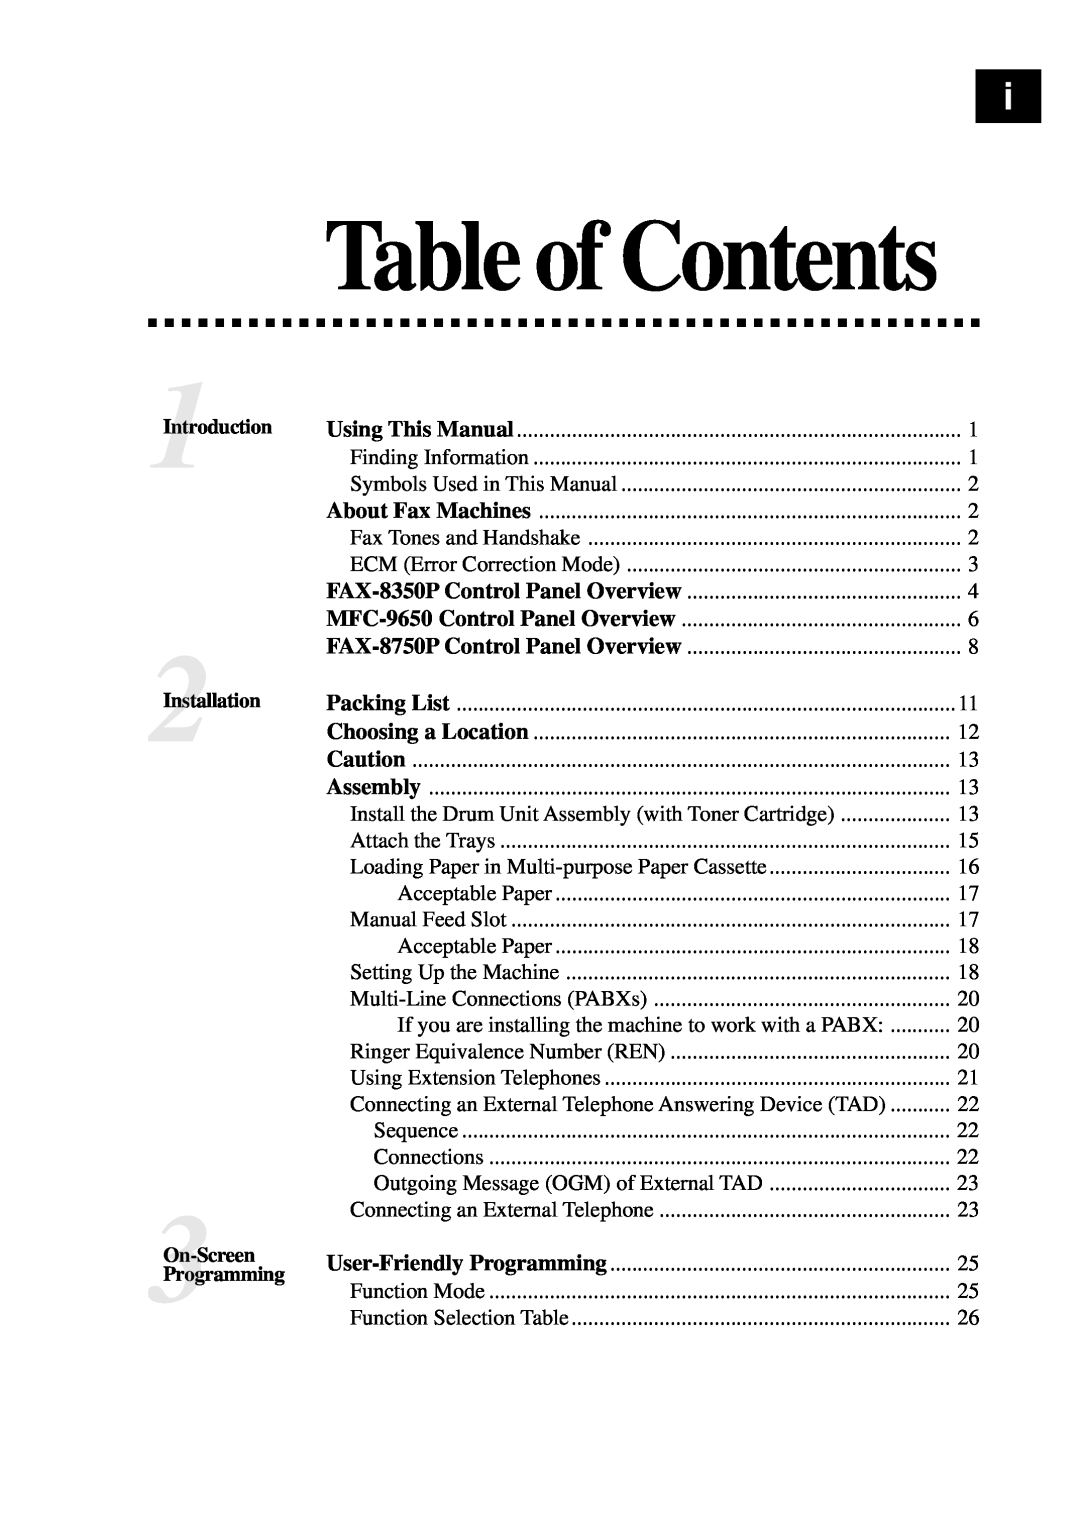 Brother MFC-9650, FAX-8350P owner manual Table of Contents, 1Introduction 2Installation 